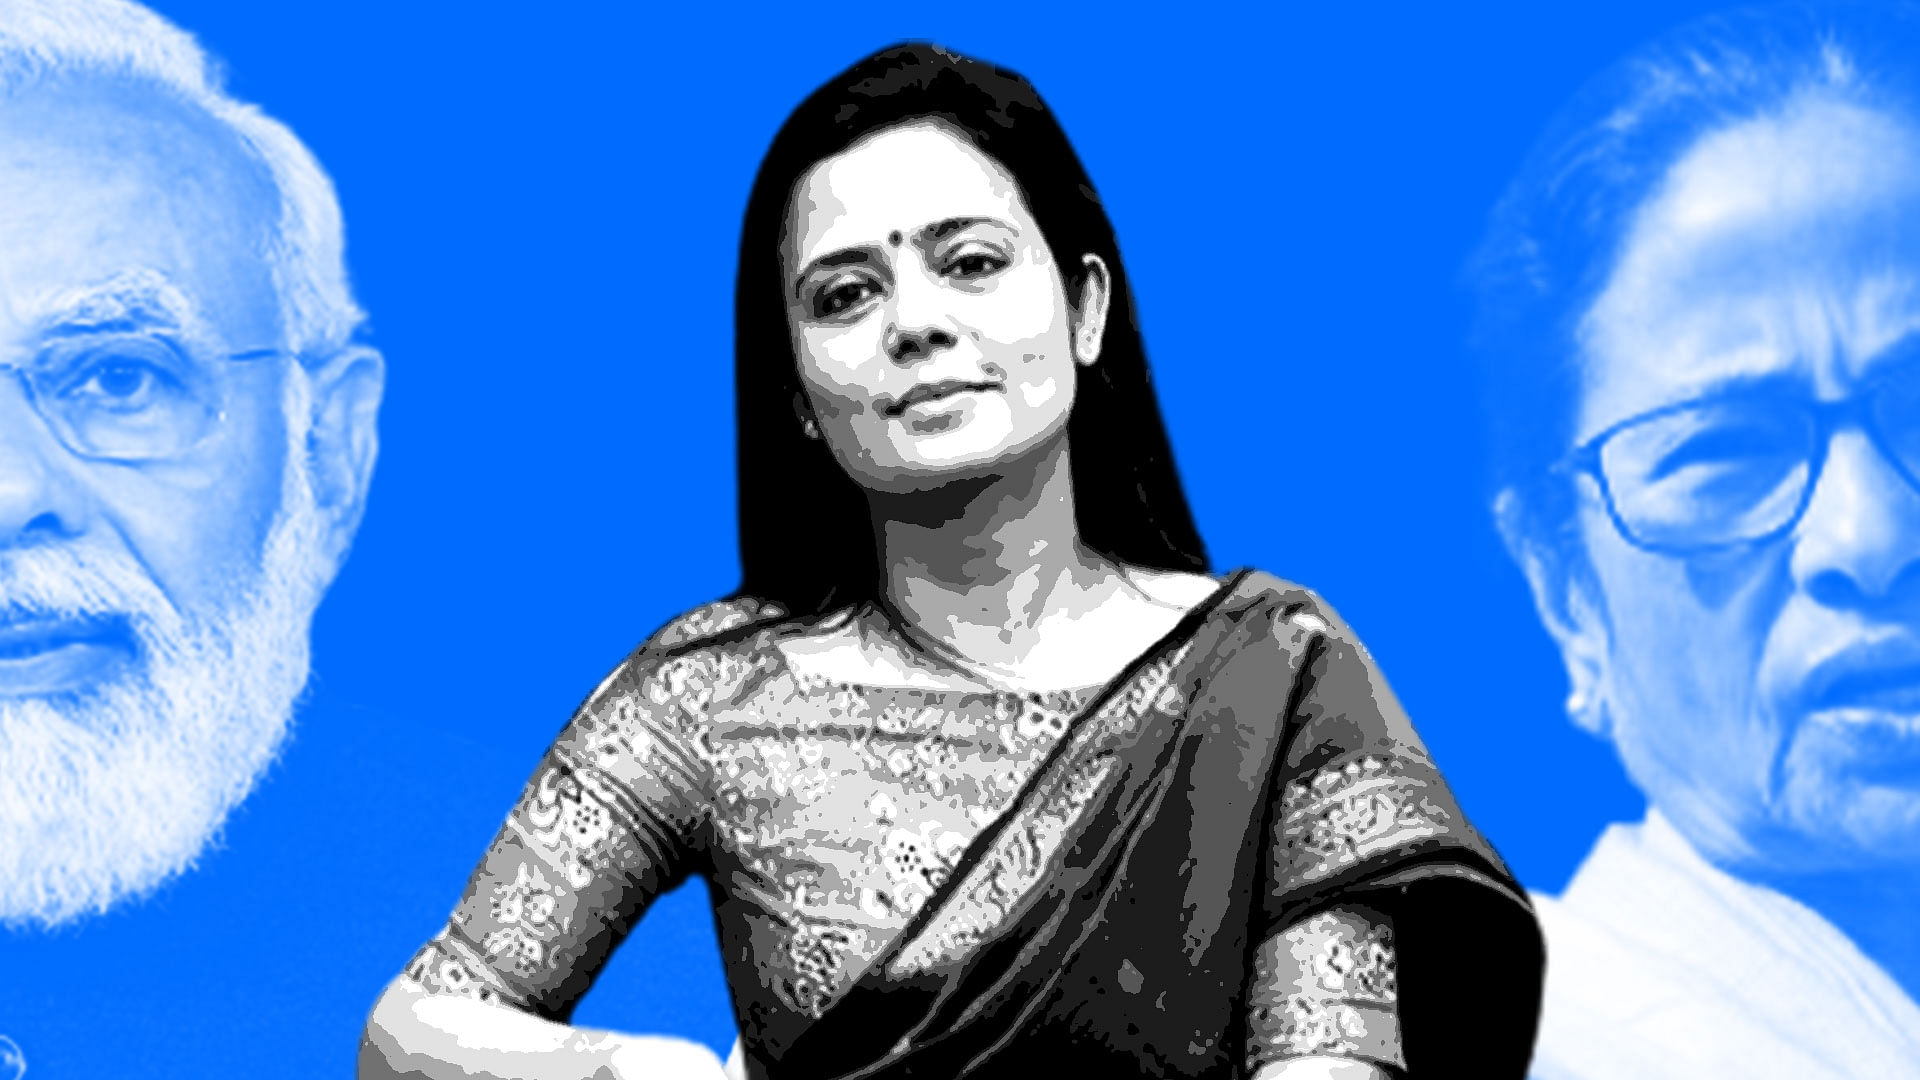 One of the first things you notice about Mahua Moitra is her